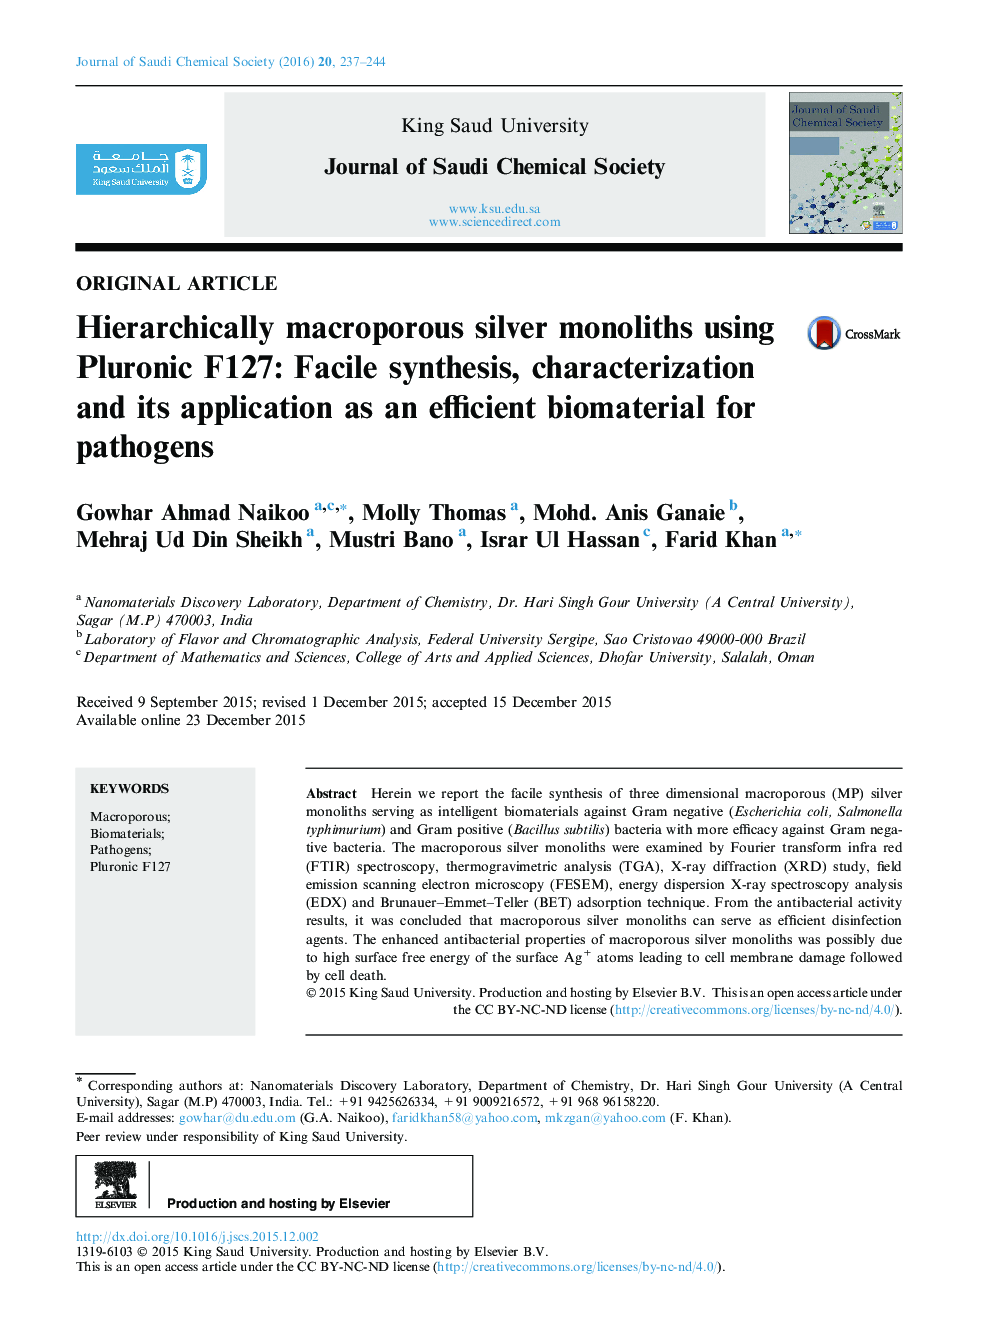 Hierarchically macroporous silver monoliths using Pluronic F127: Facile synthesis, characterization and its application as an efficient biomaterial for pathogens 